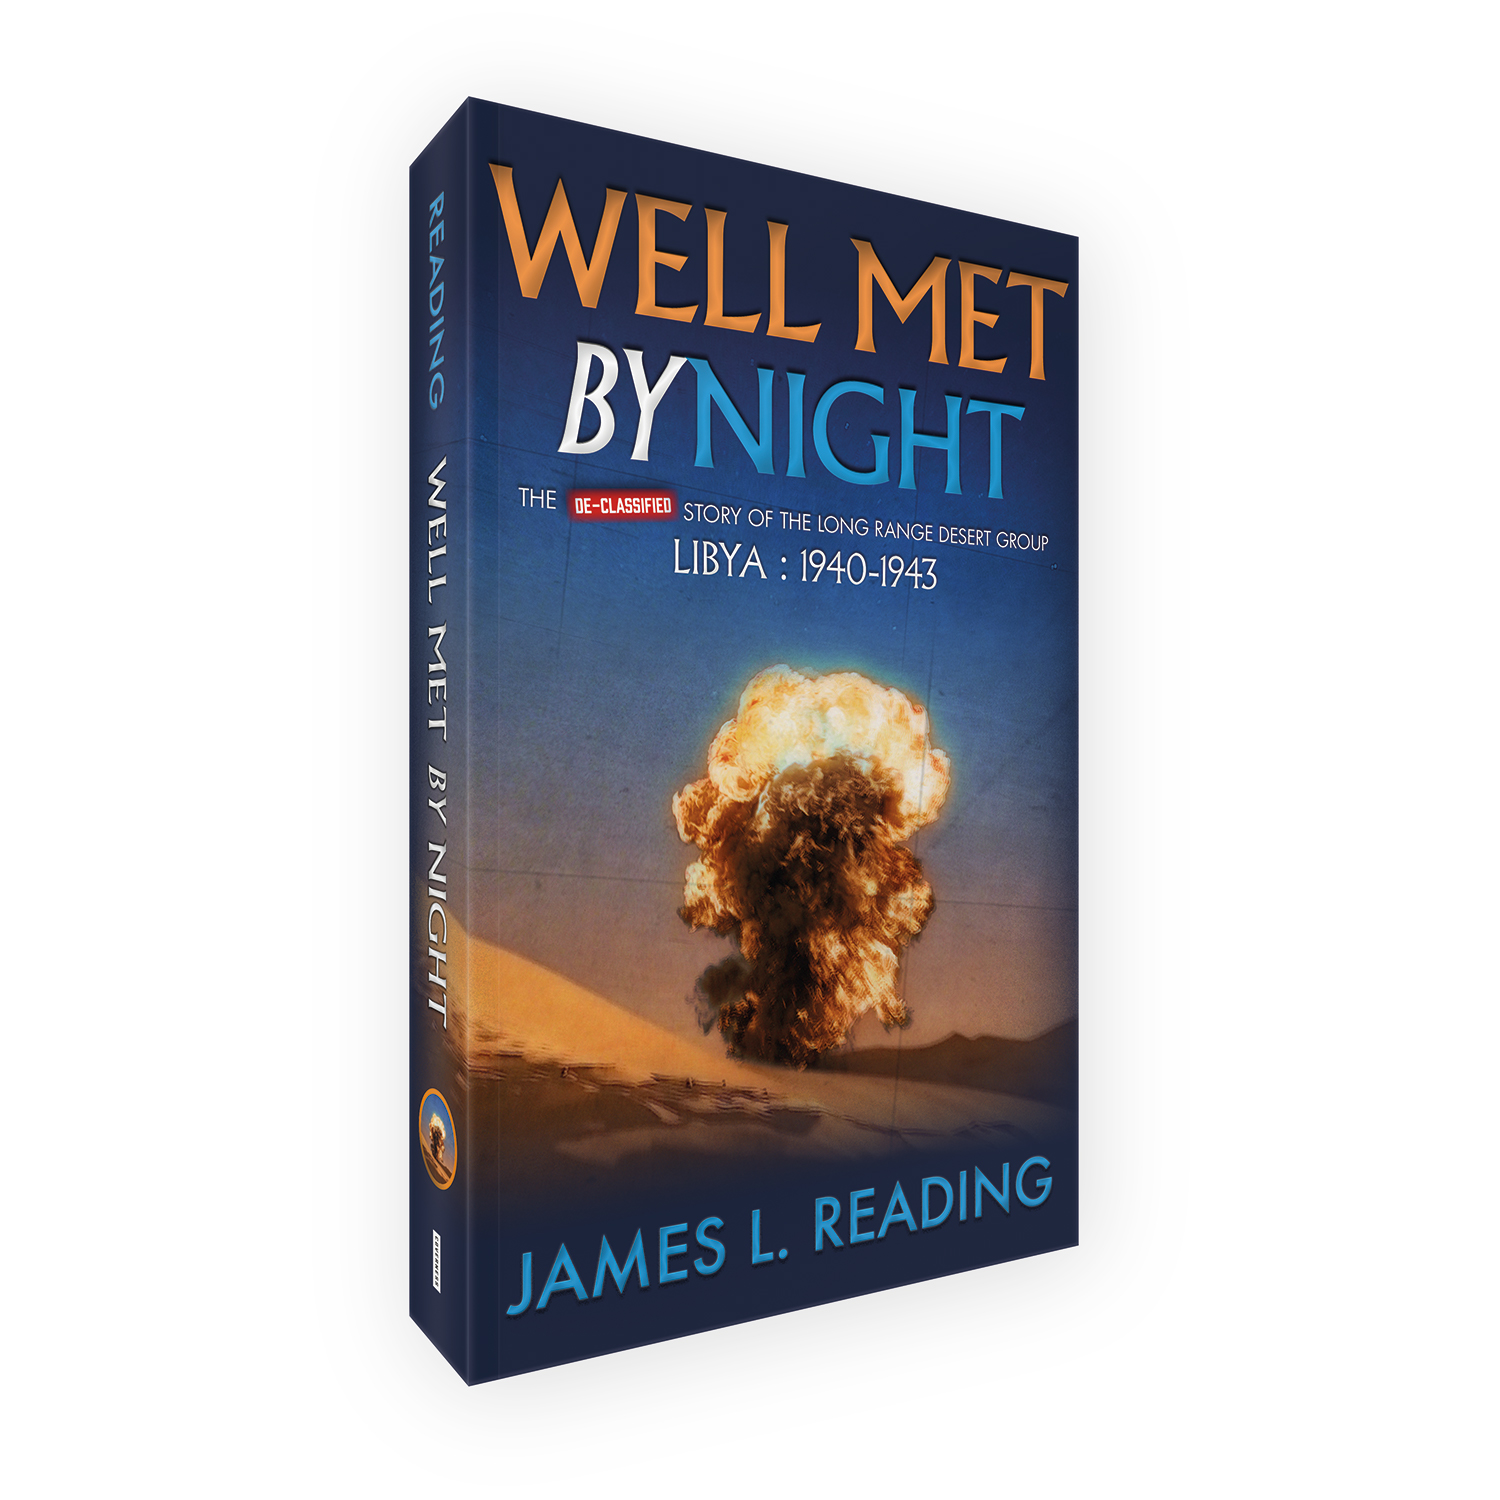 'Well Met By Night' is a bespoke cover design for a military history book. The book cover was designed by Mark Thomas, of coverness.com. To find out more about my book design services, please visit www.coverness.com.